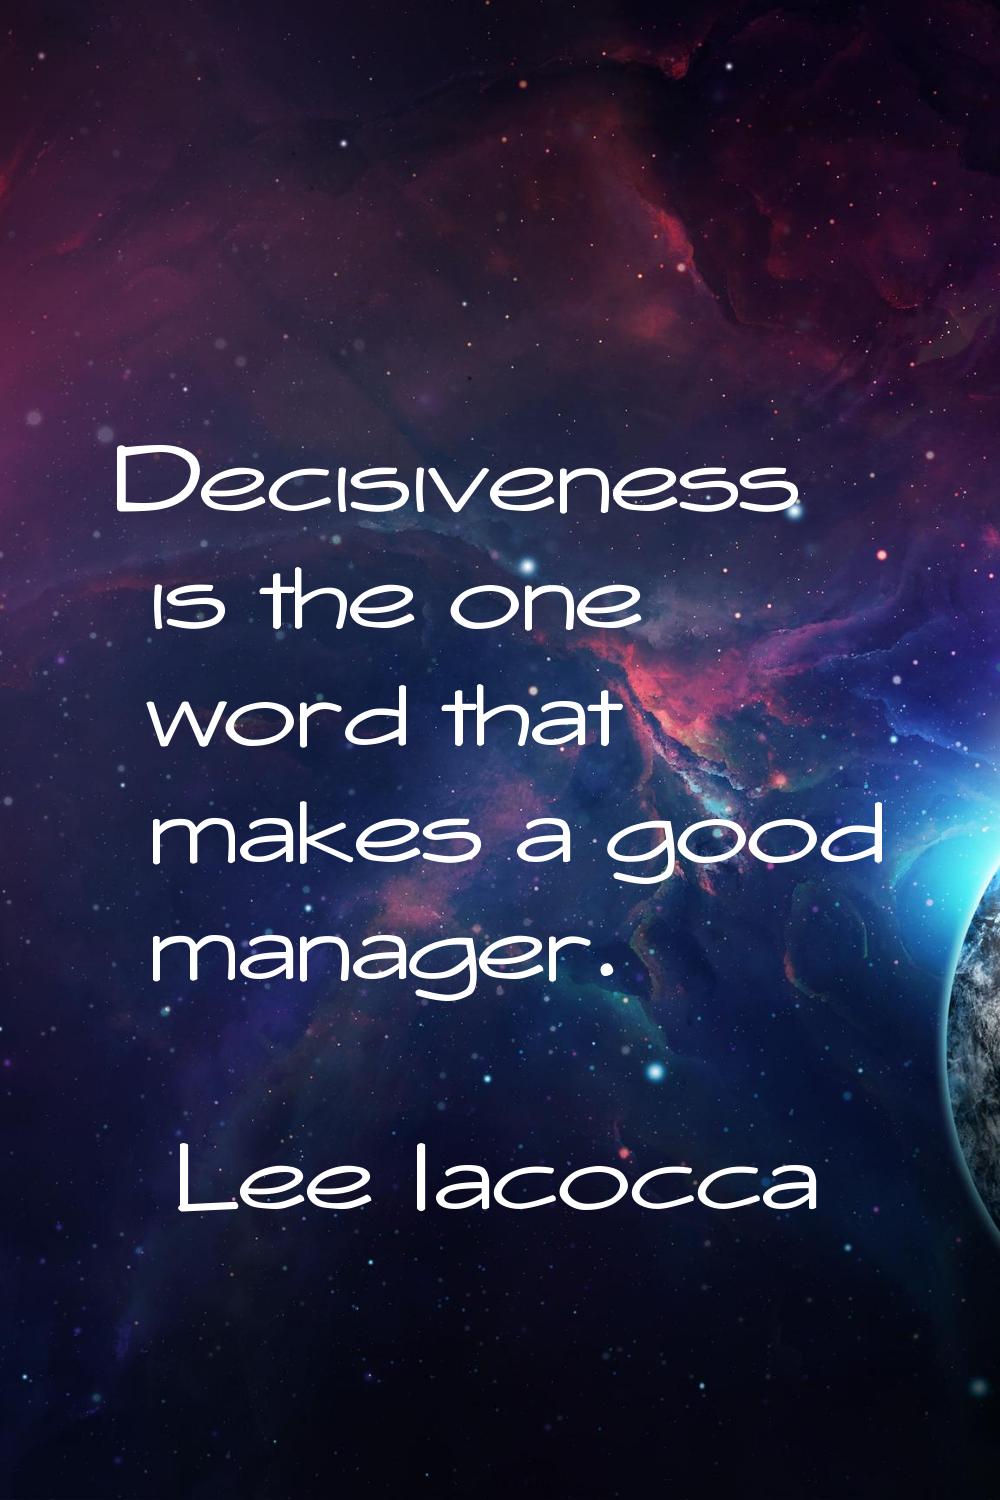 Decisiveness is the one word that makes a good manager.